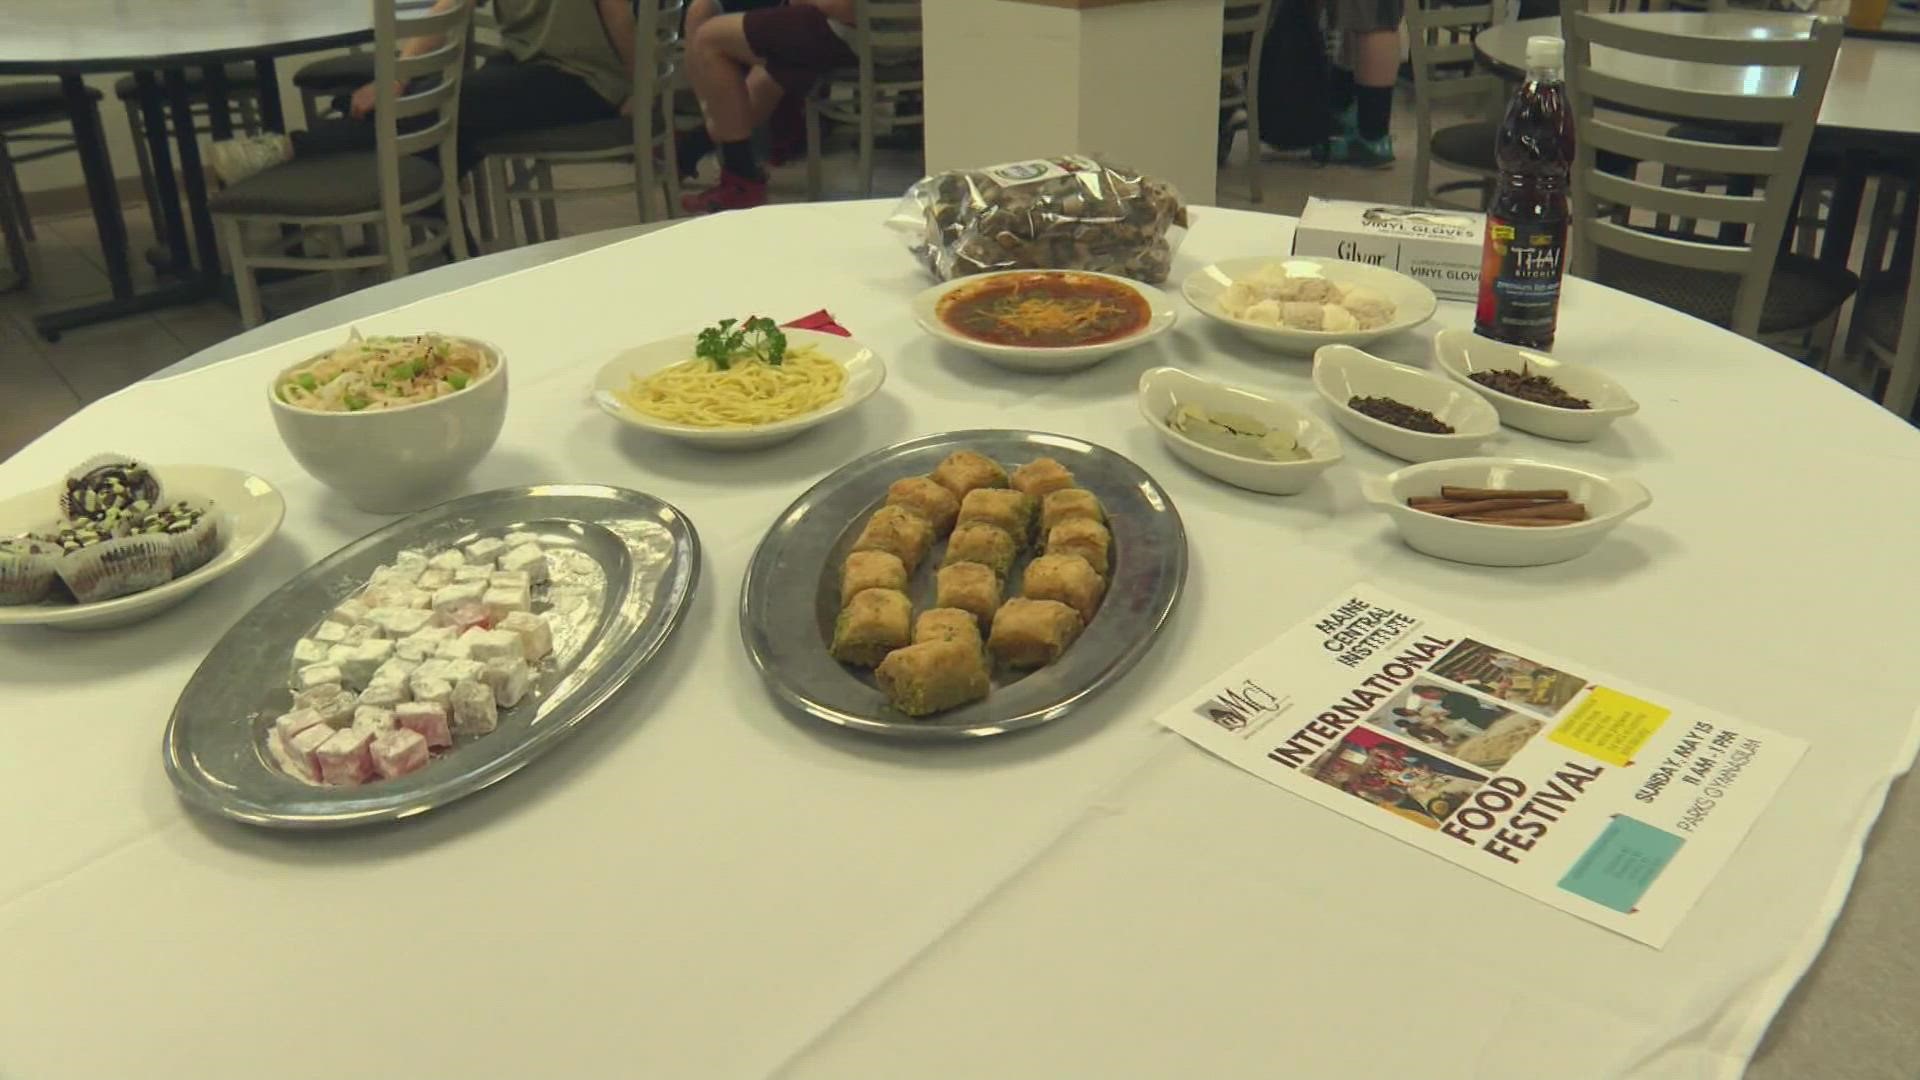 Maine Central Institute hosts international Food Festival to help the community celebrate different cultures.